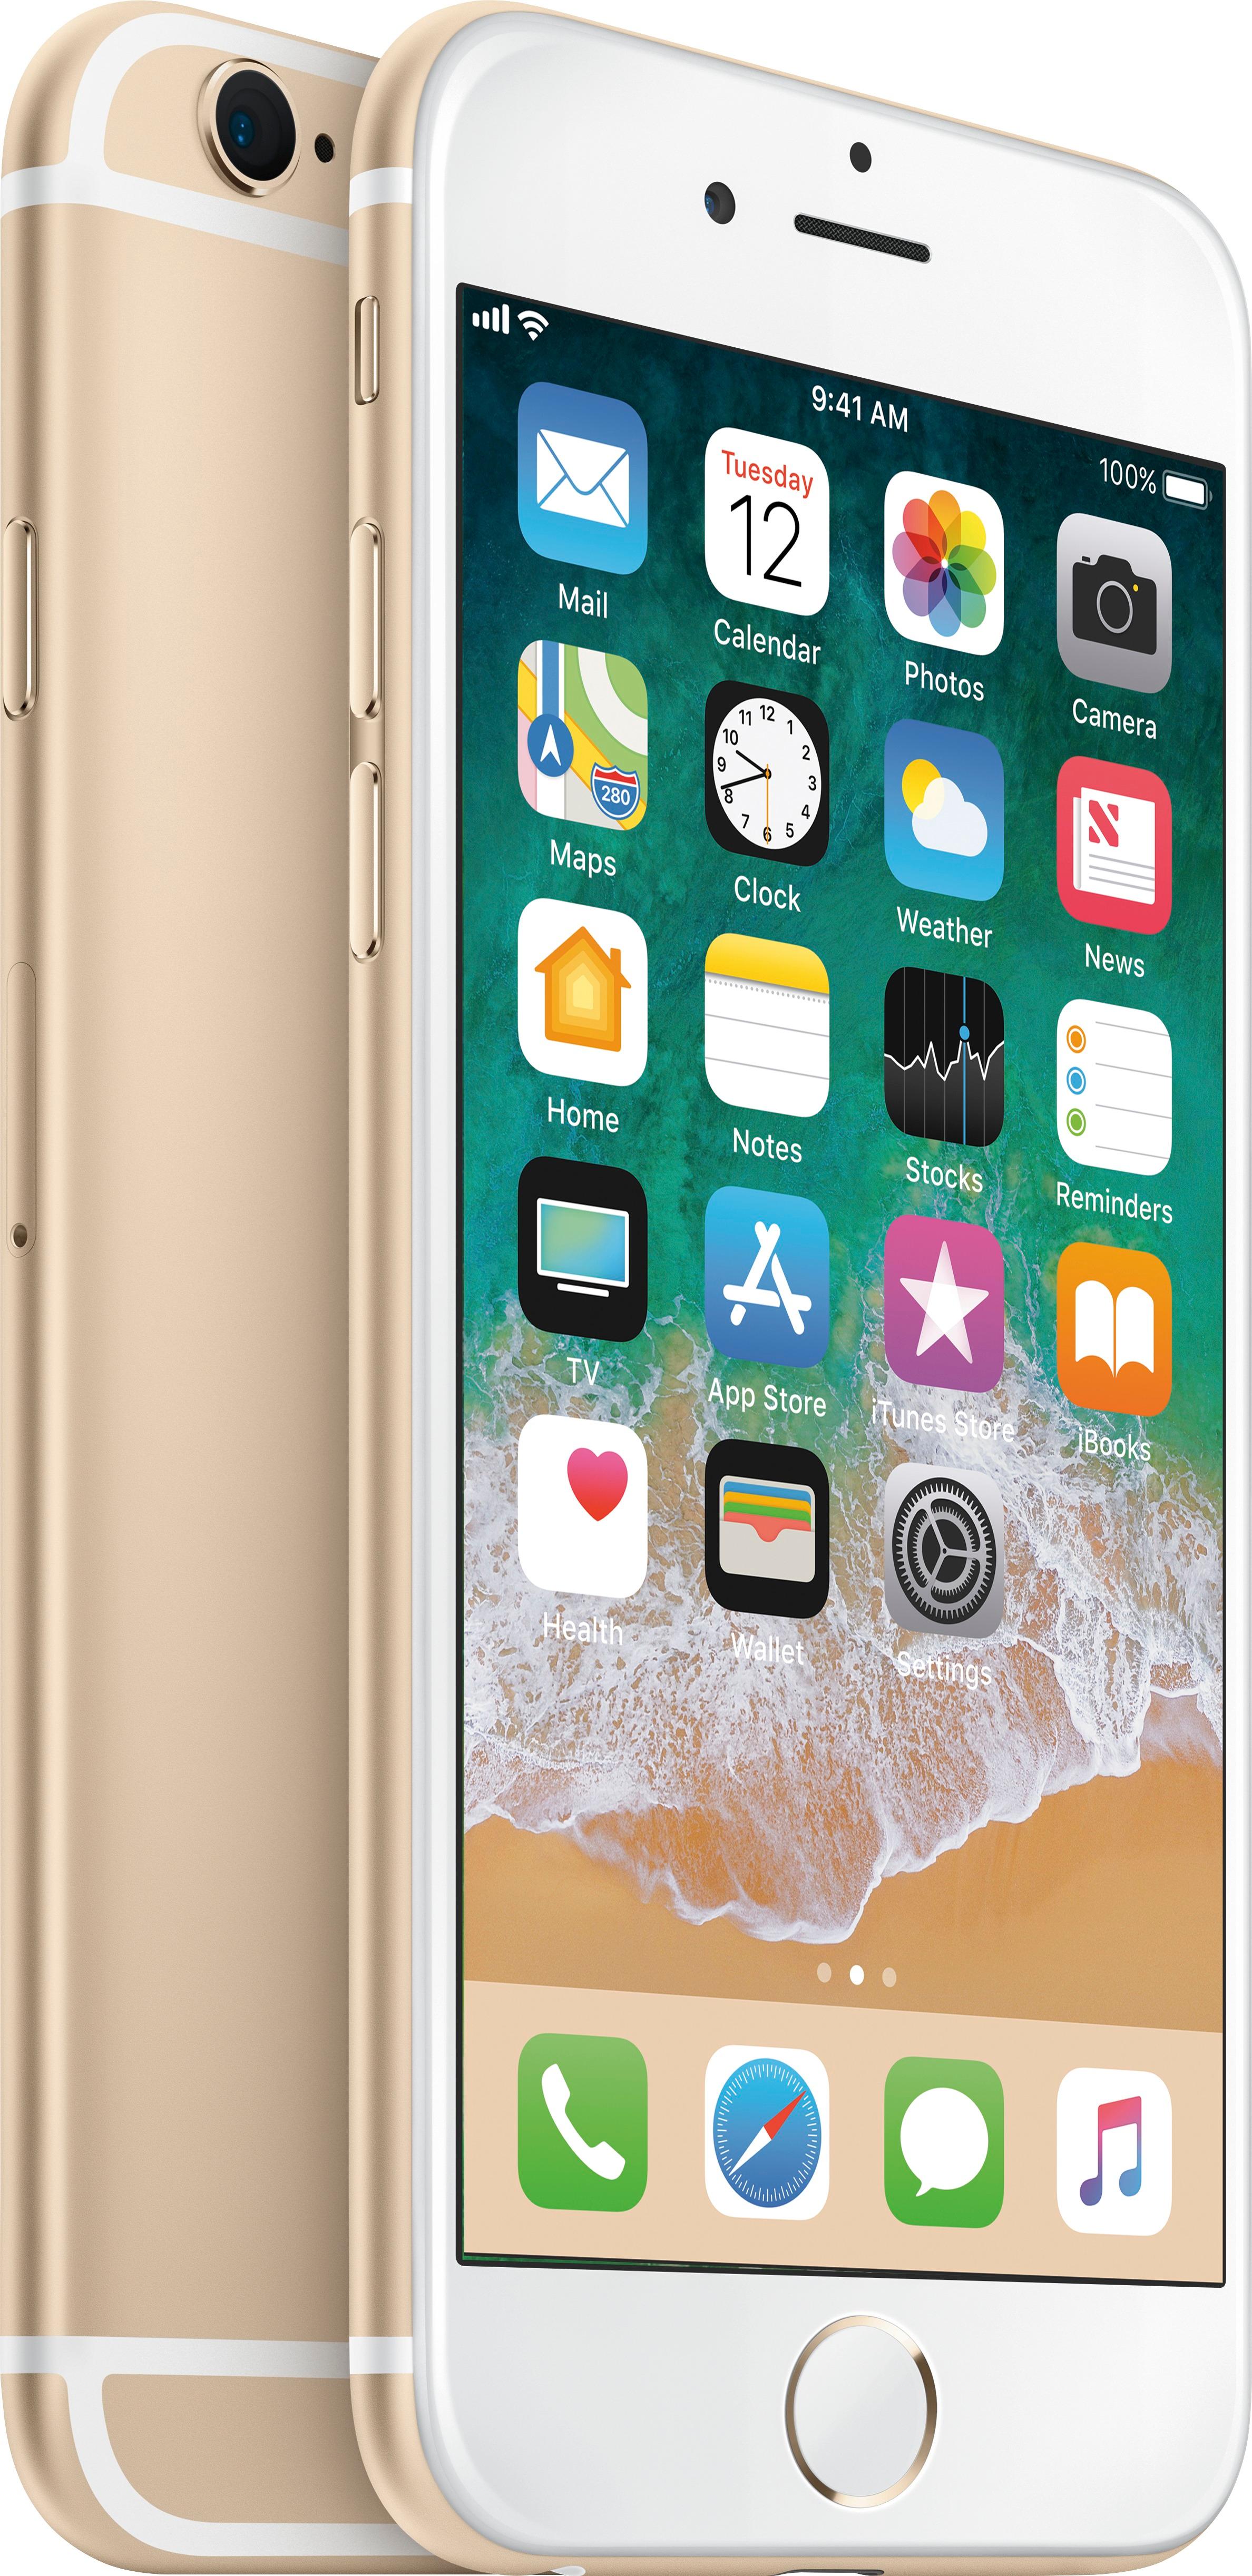 Brikk Launches 5.5 inch version of iPhone 6 in 24k Gold and Platinum